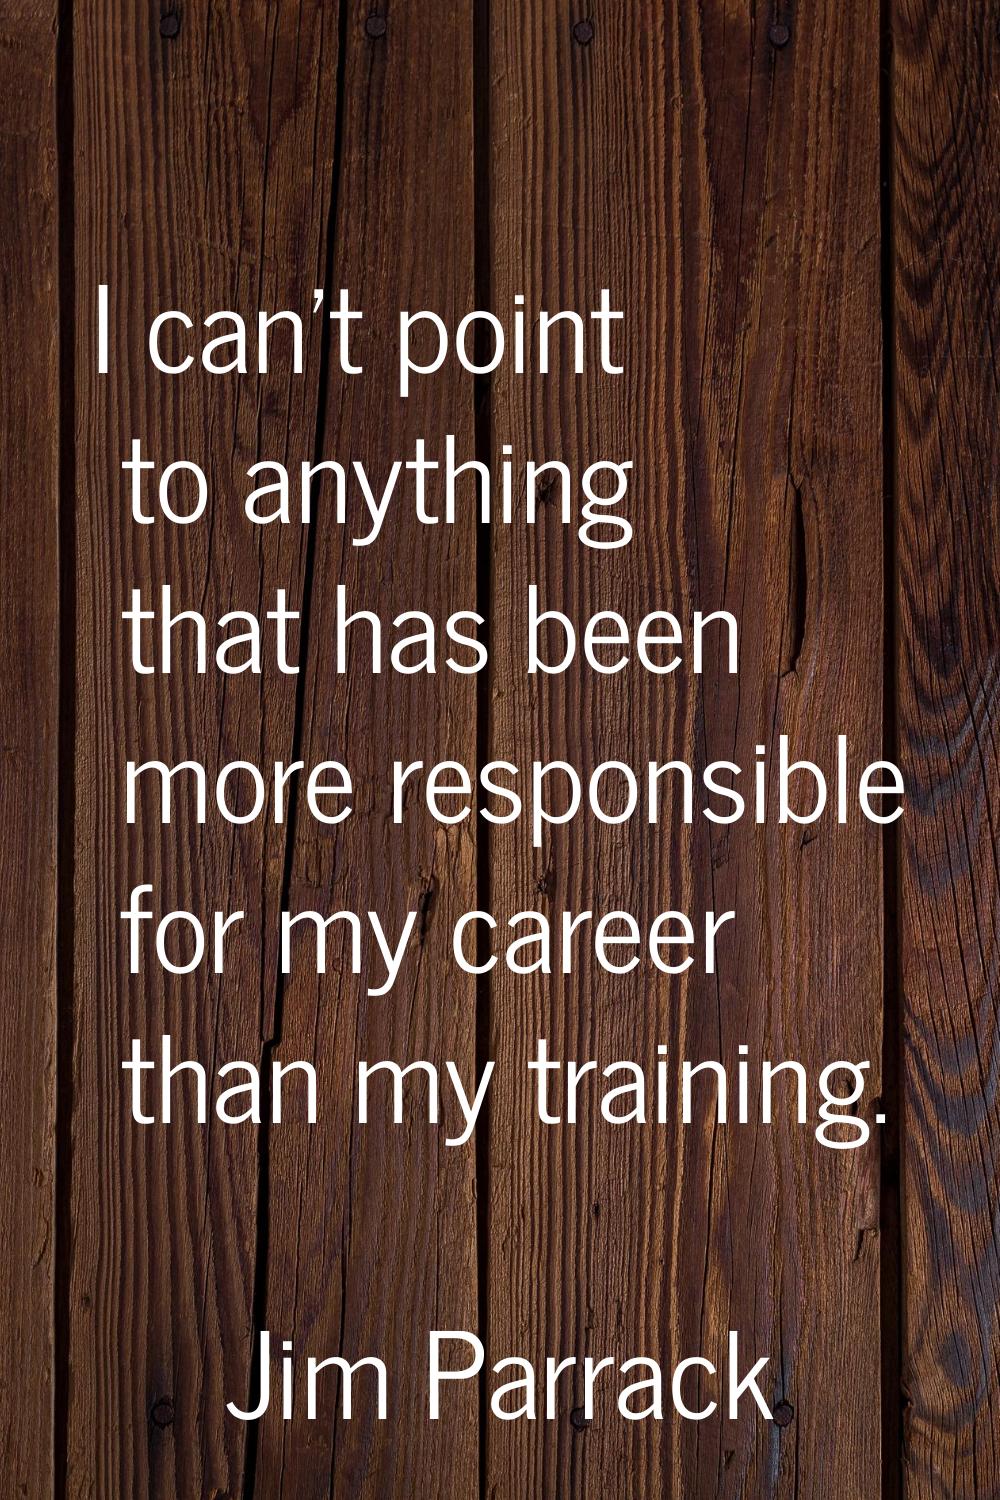 I can't point to anything that has been more responsible for my career than my training.